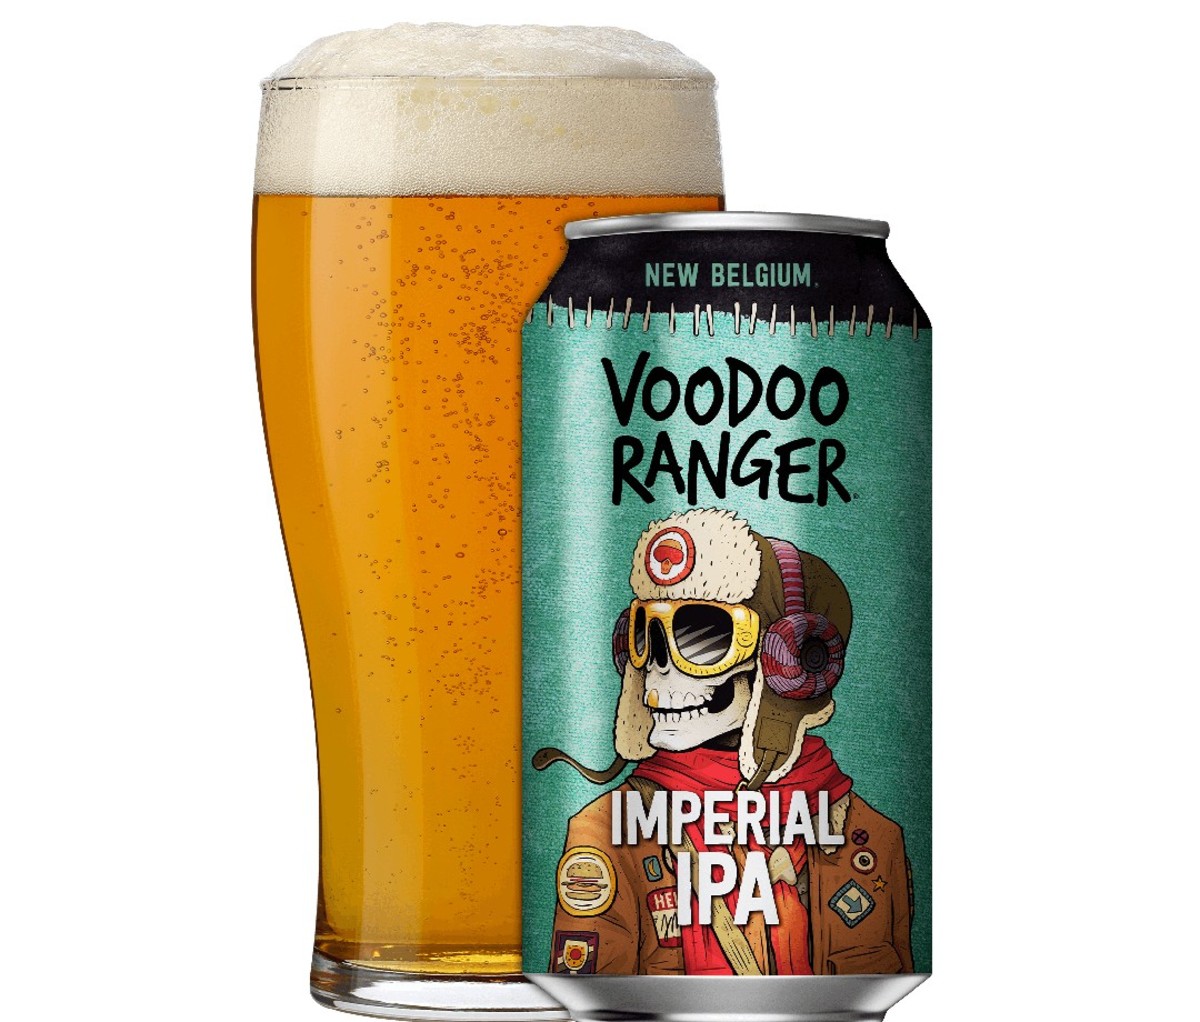 Can of New Belgium Voodoo Ranger Imperial IPA beer beside a full pint glass